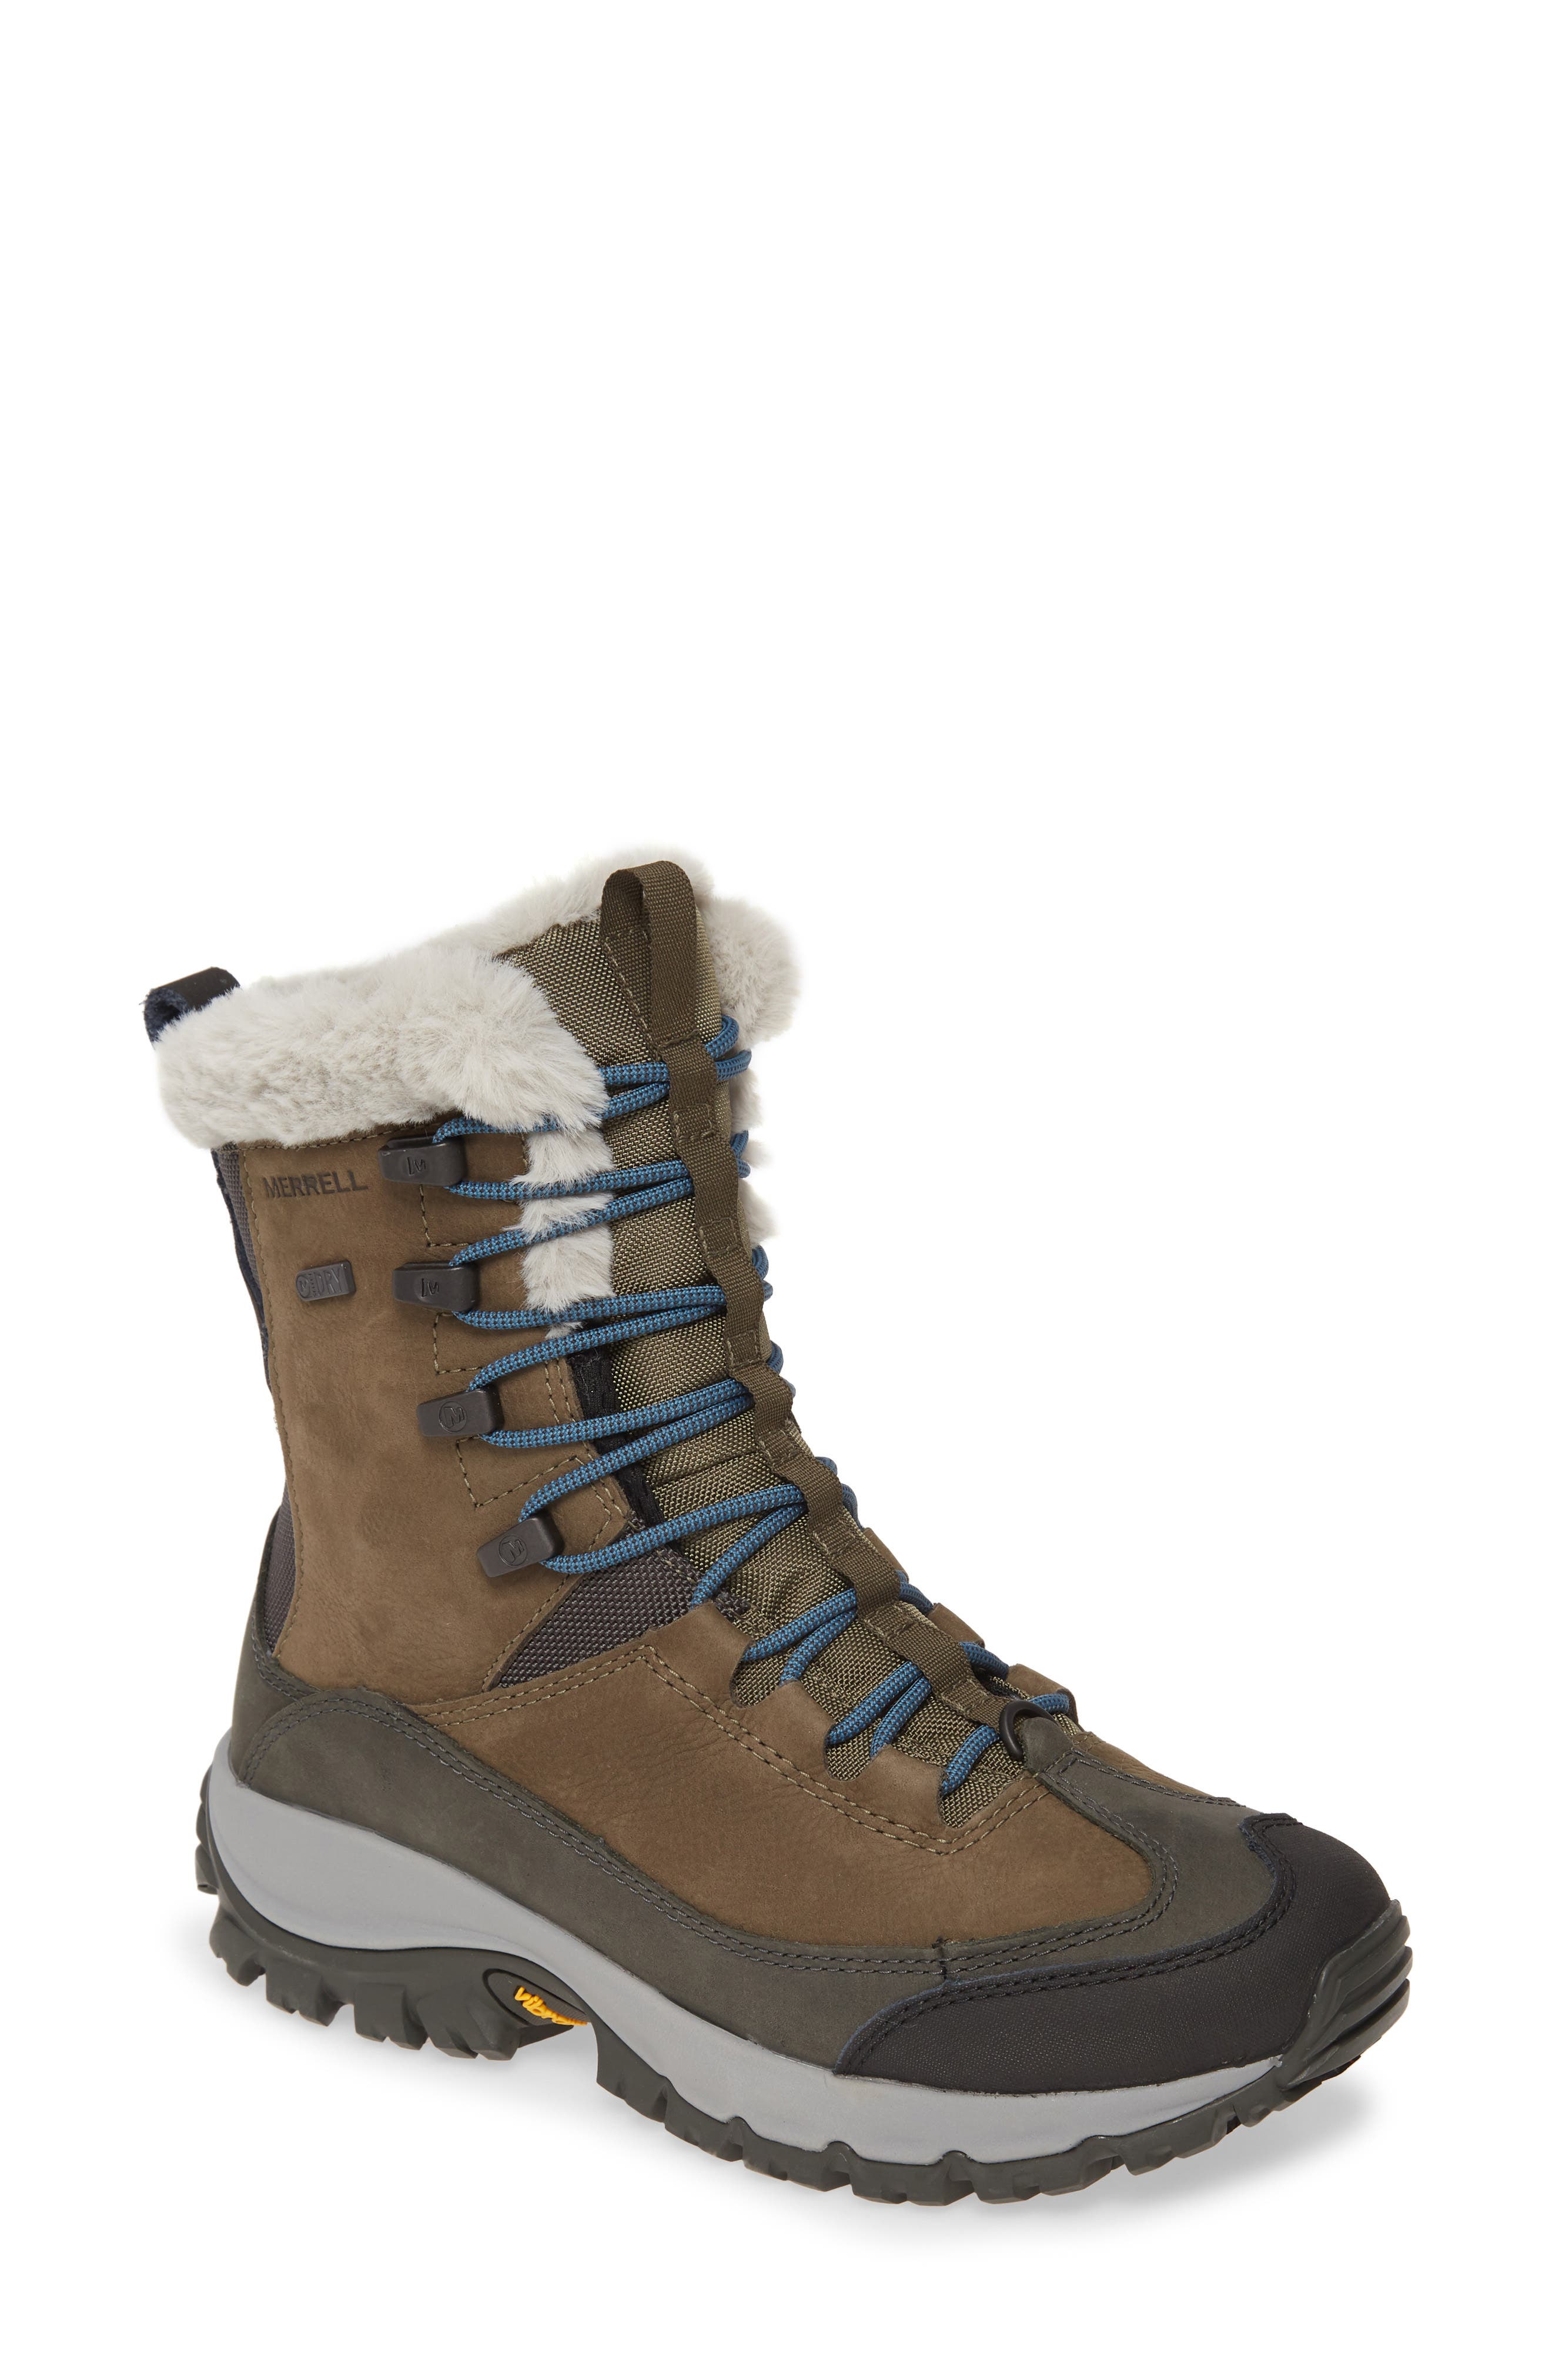 merrell fur lined boots